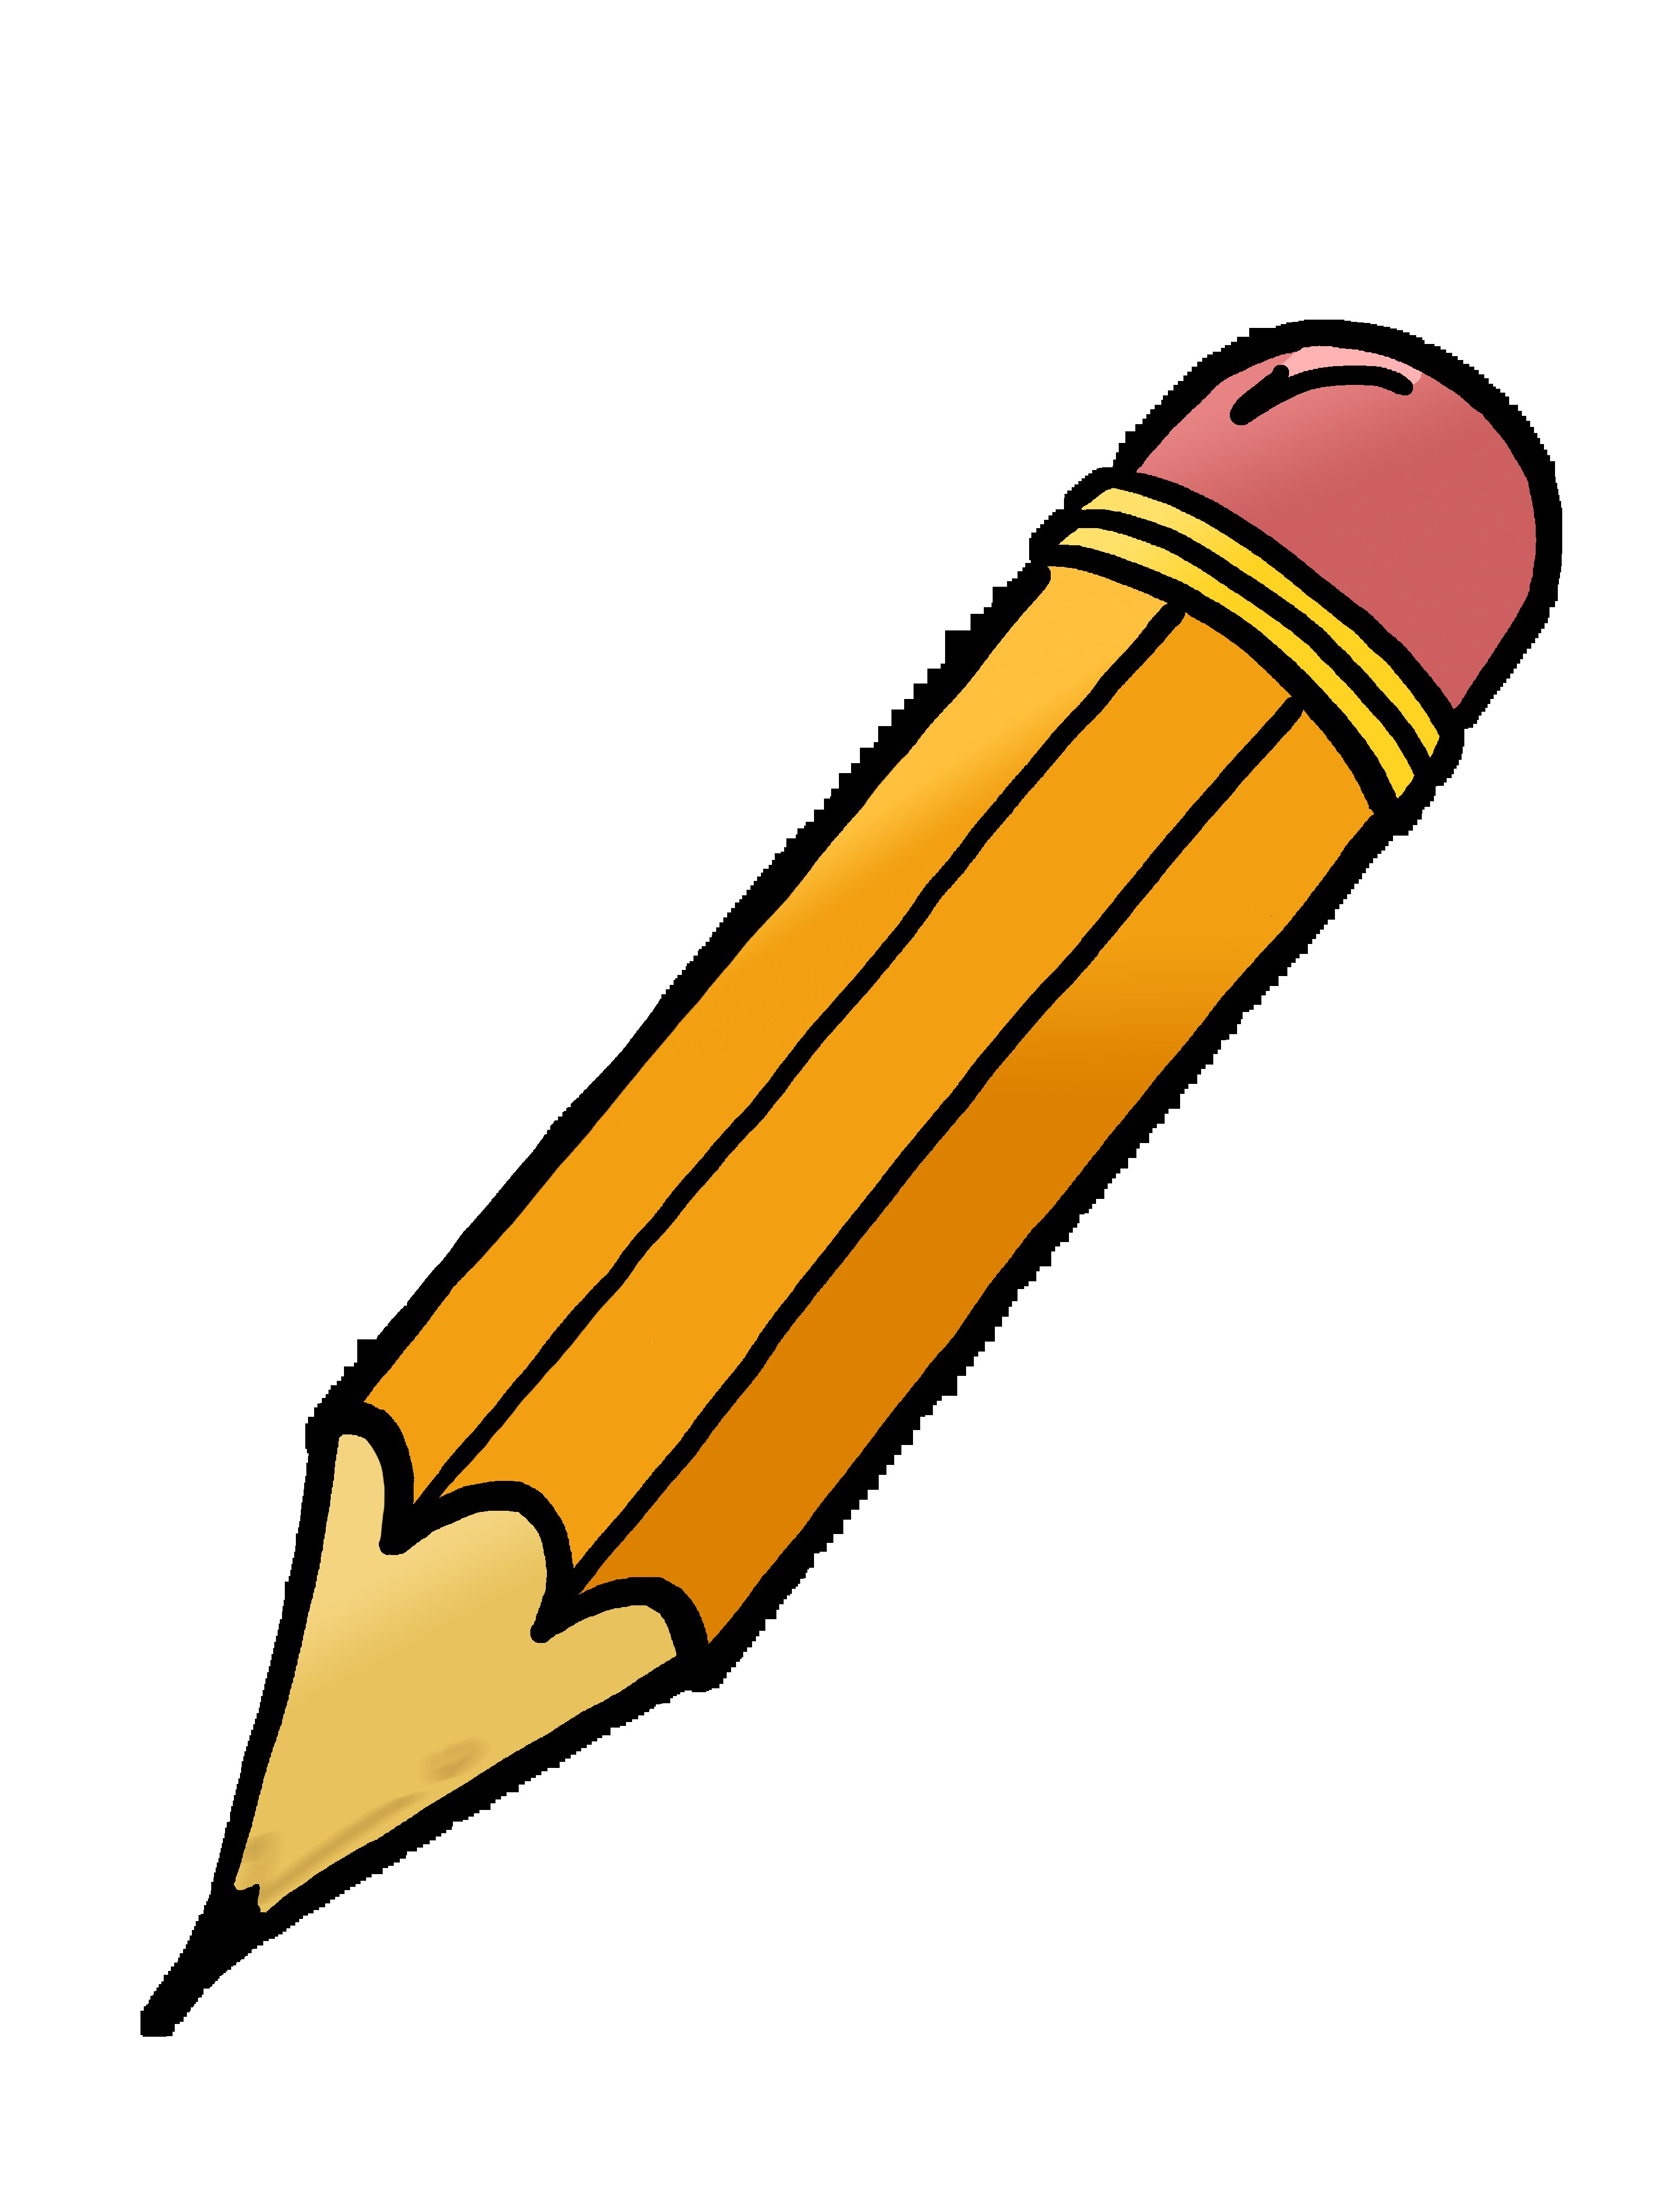 Free Pencil Pictures, Download Free Clip Art, Free Clip Art